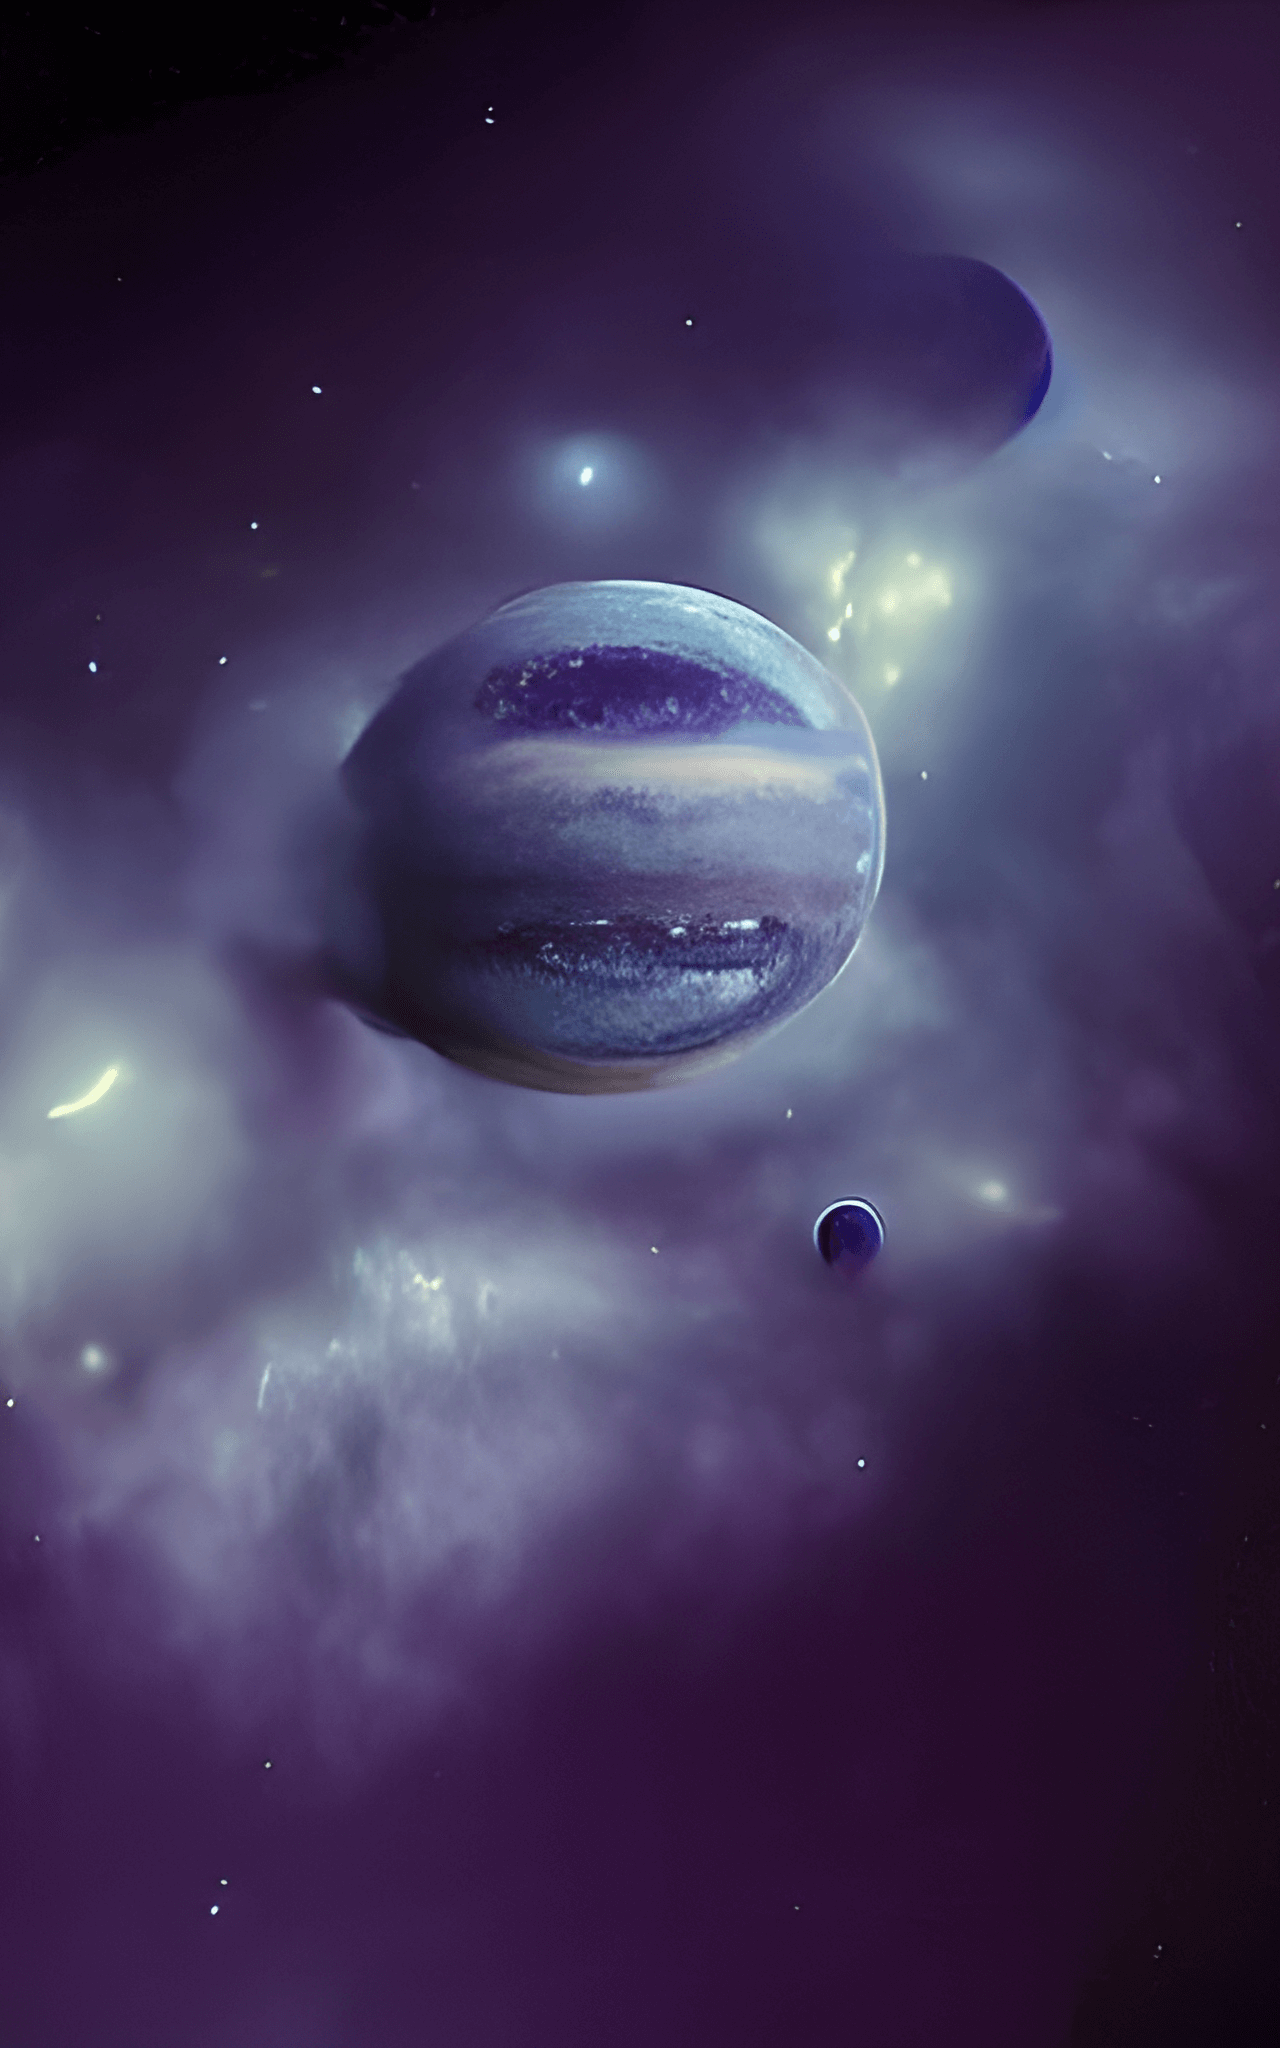 A purple and blue nebula surrounds a planet with two moons. - Galaxy